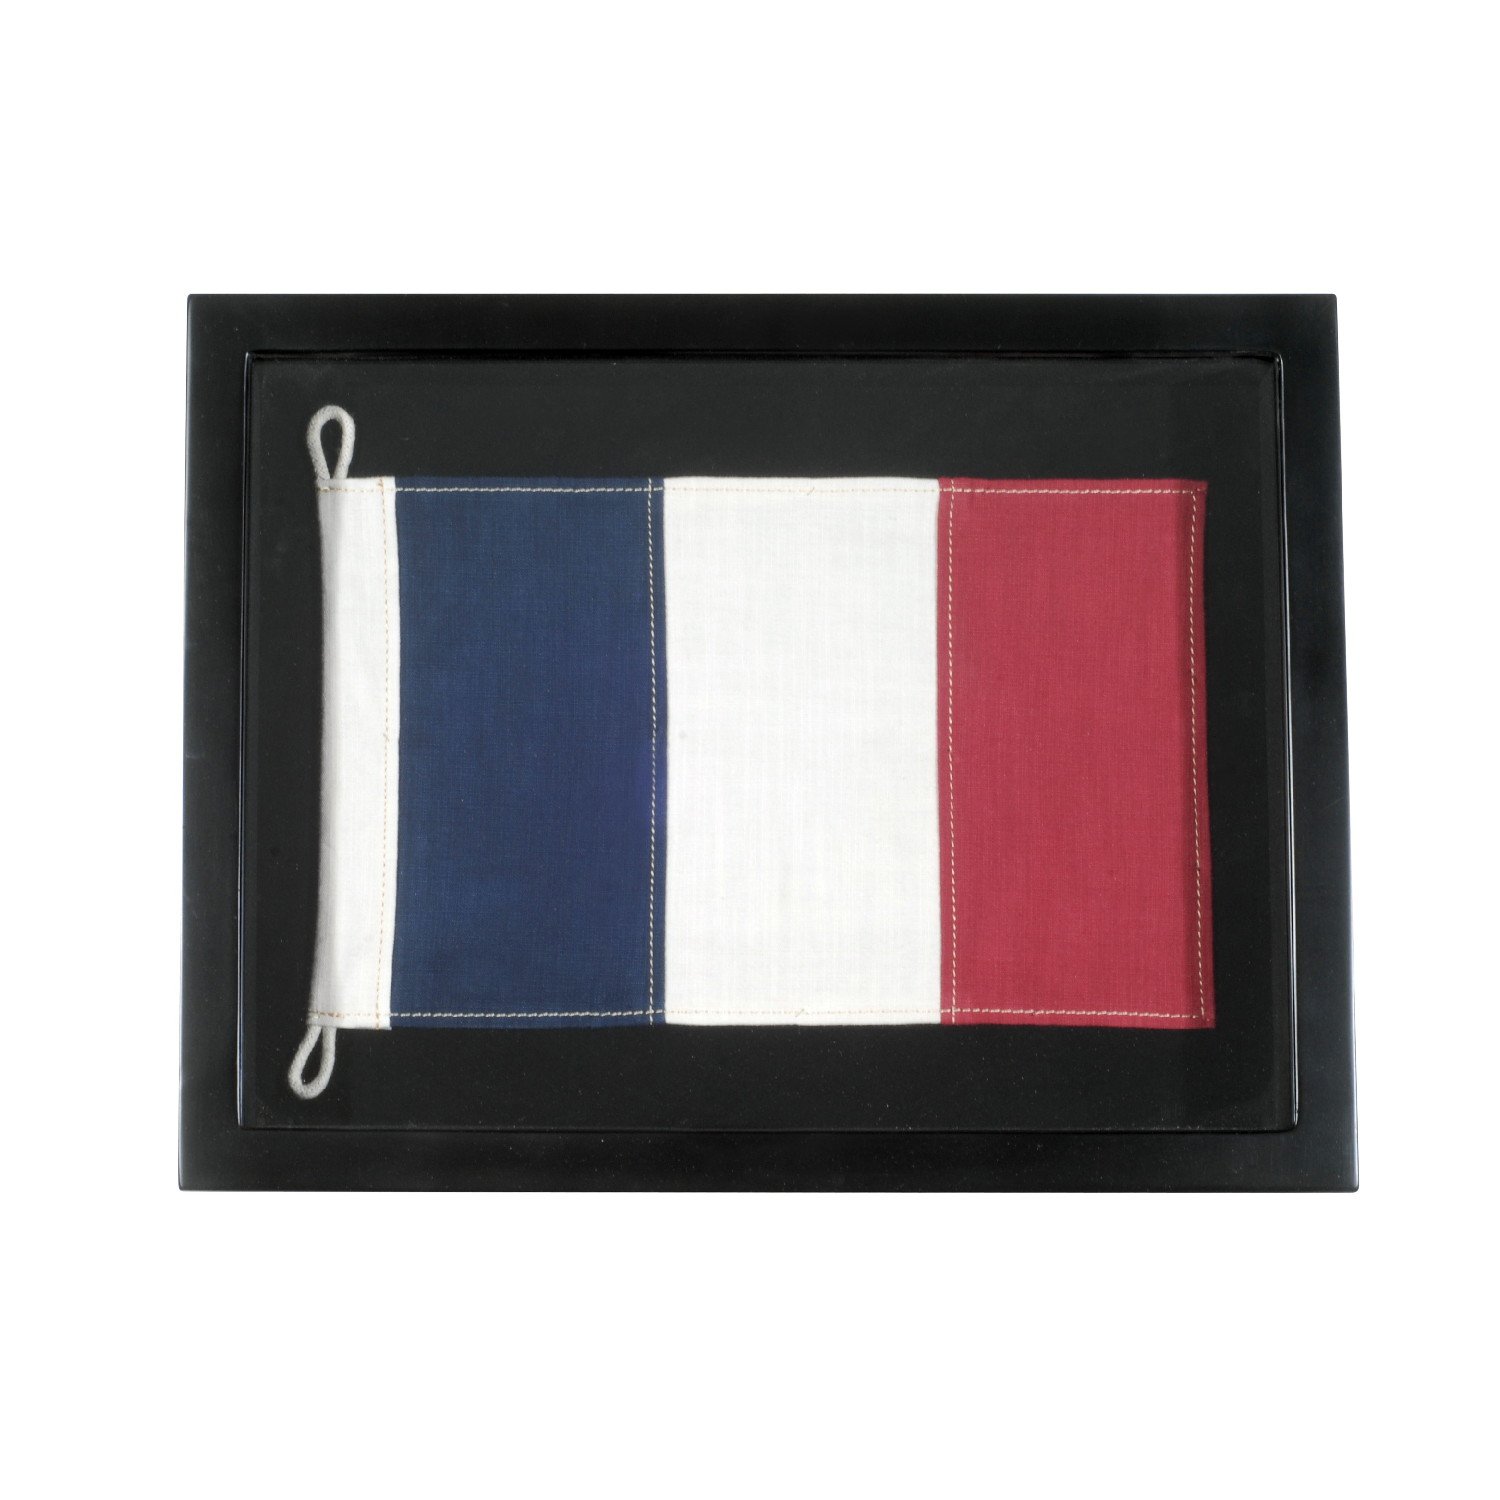 Photo of Timothy oulton flag shadow box mini print in square in blue